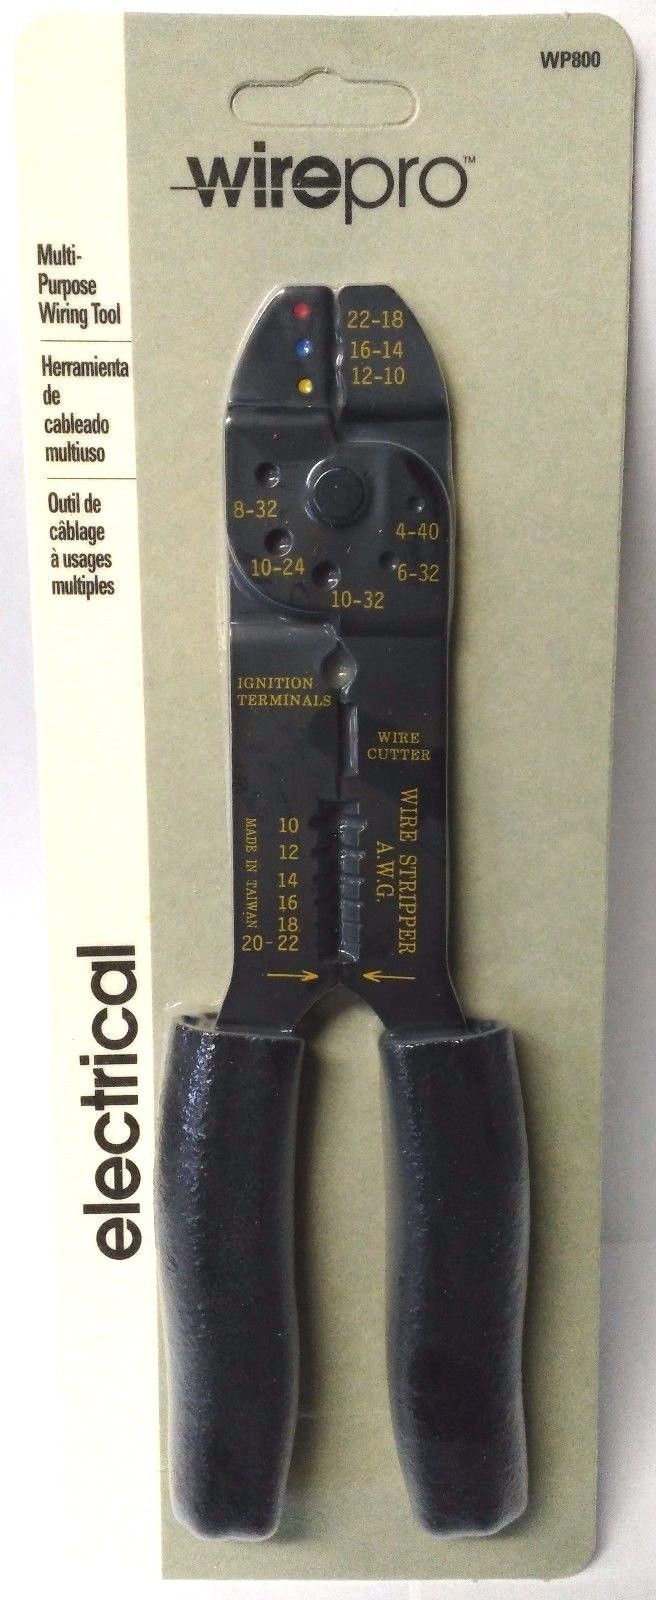 Wirepro by Klein WP800 9" Multi-Purpose Wiring Tool Cutter & Crimpers